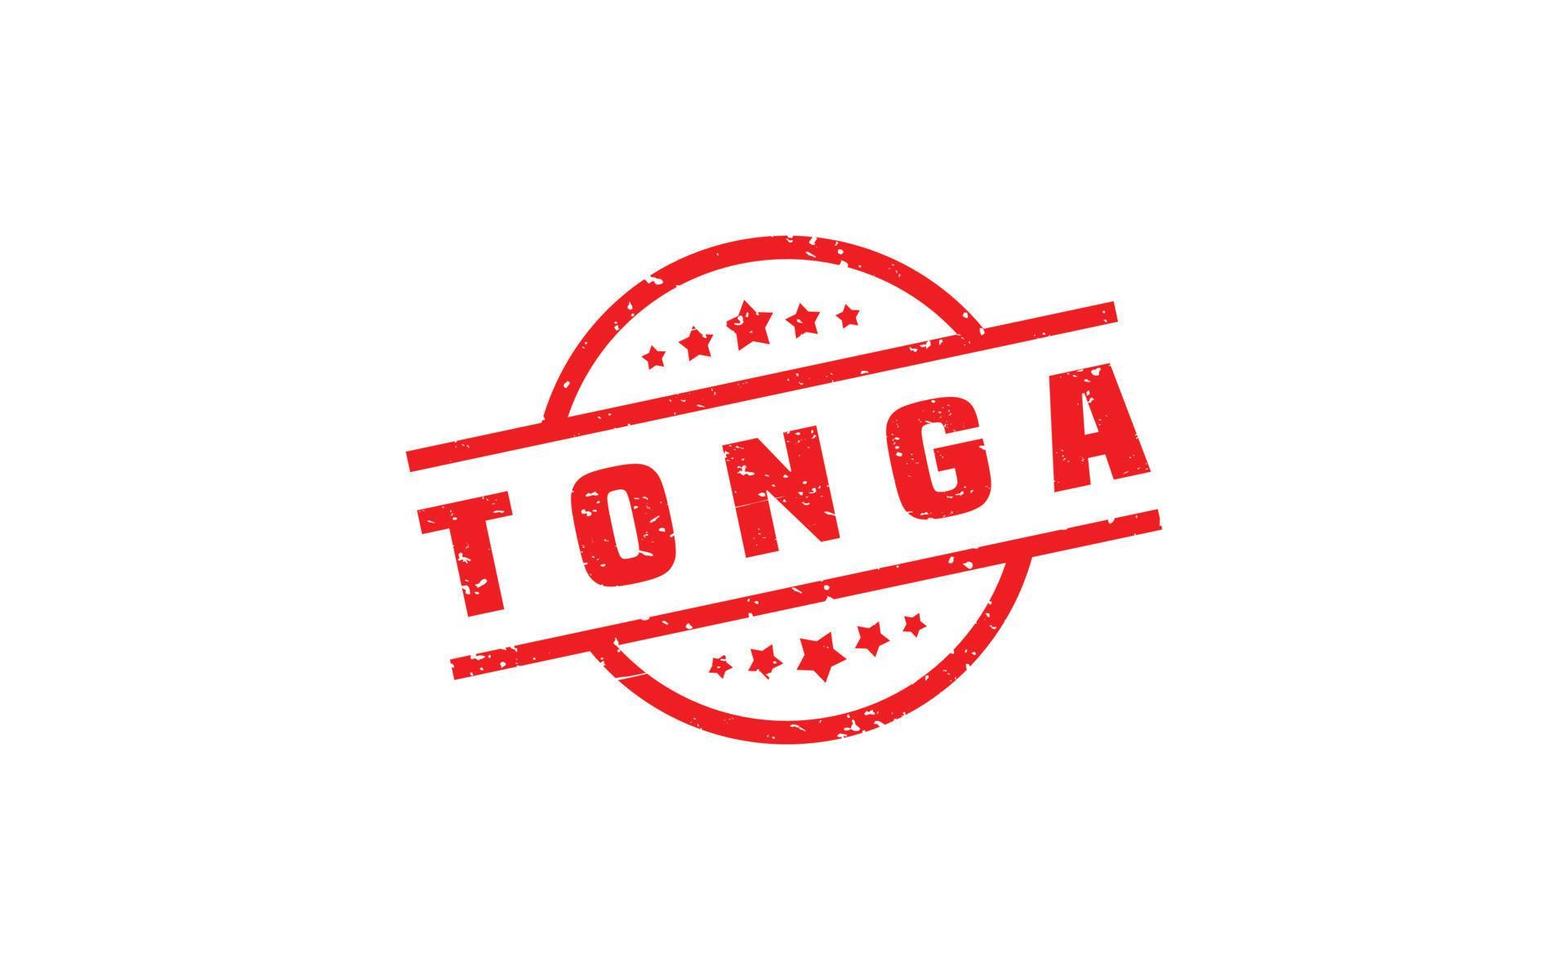 Tonga stamp rubber with grunge style on white background vector